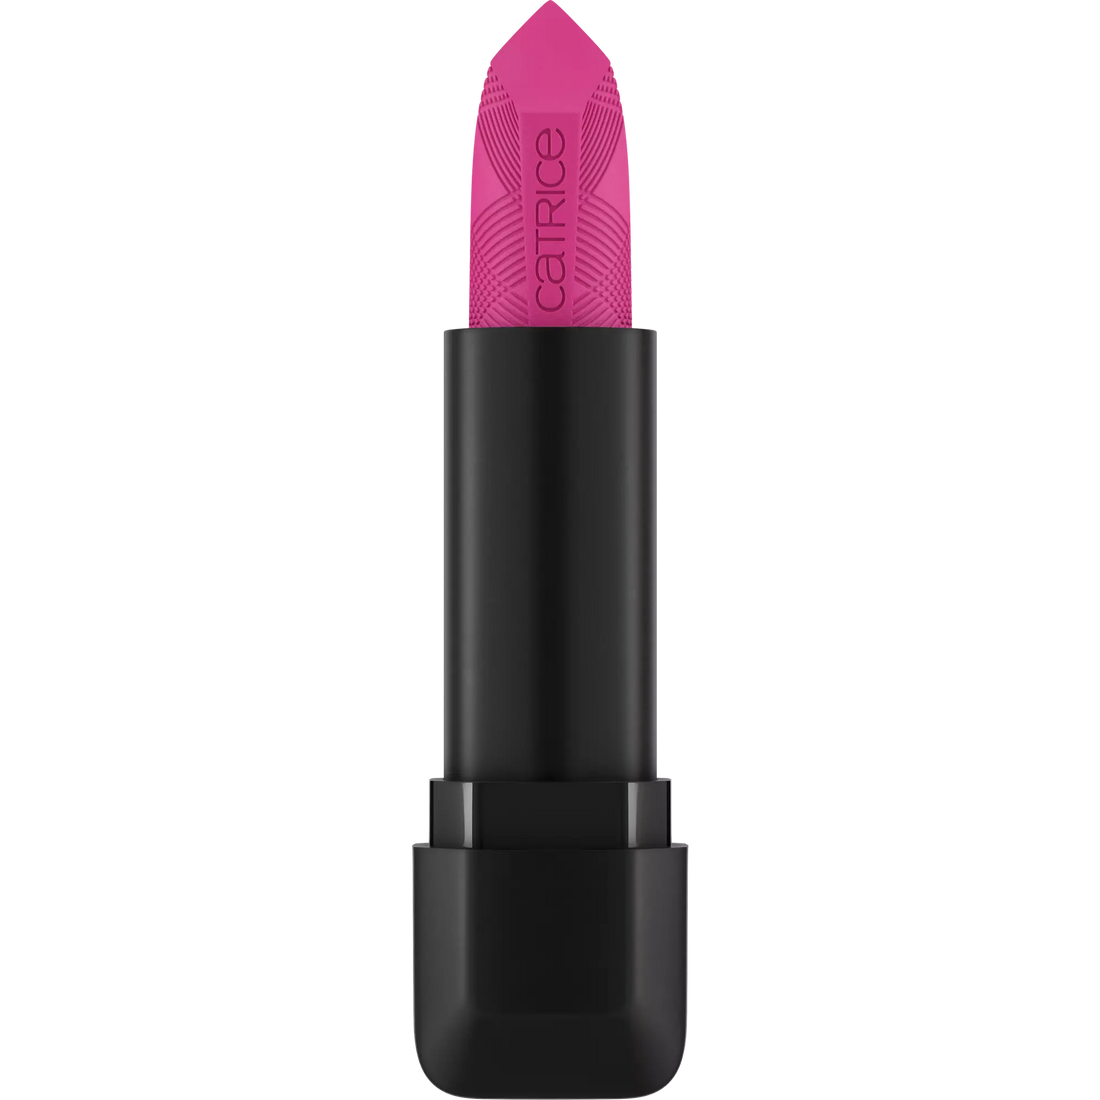 Catrice Scandalous Matte Lipstick 080 Casually Overdressed